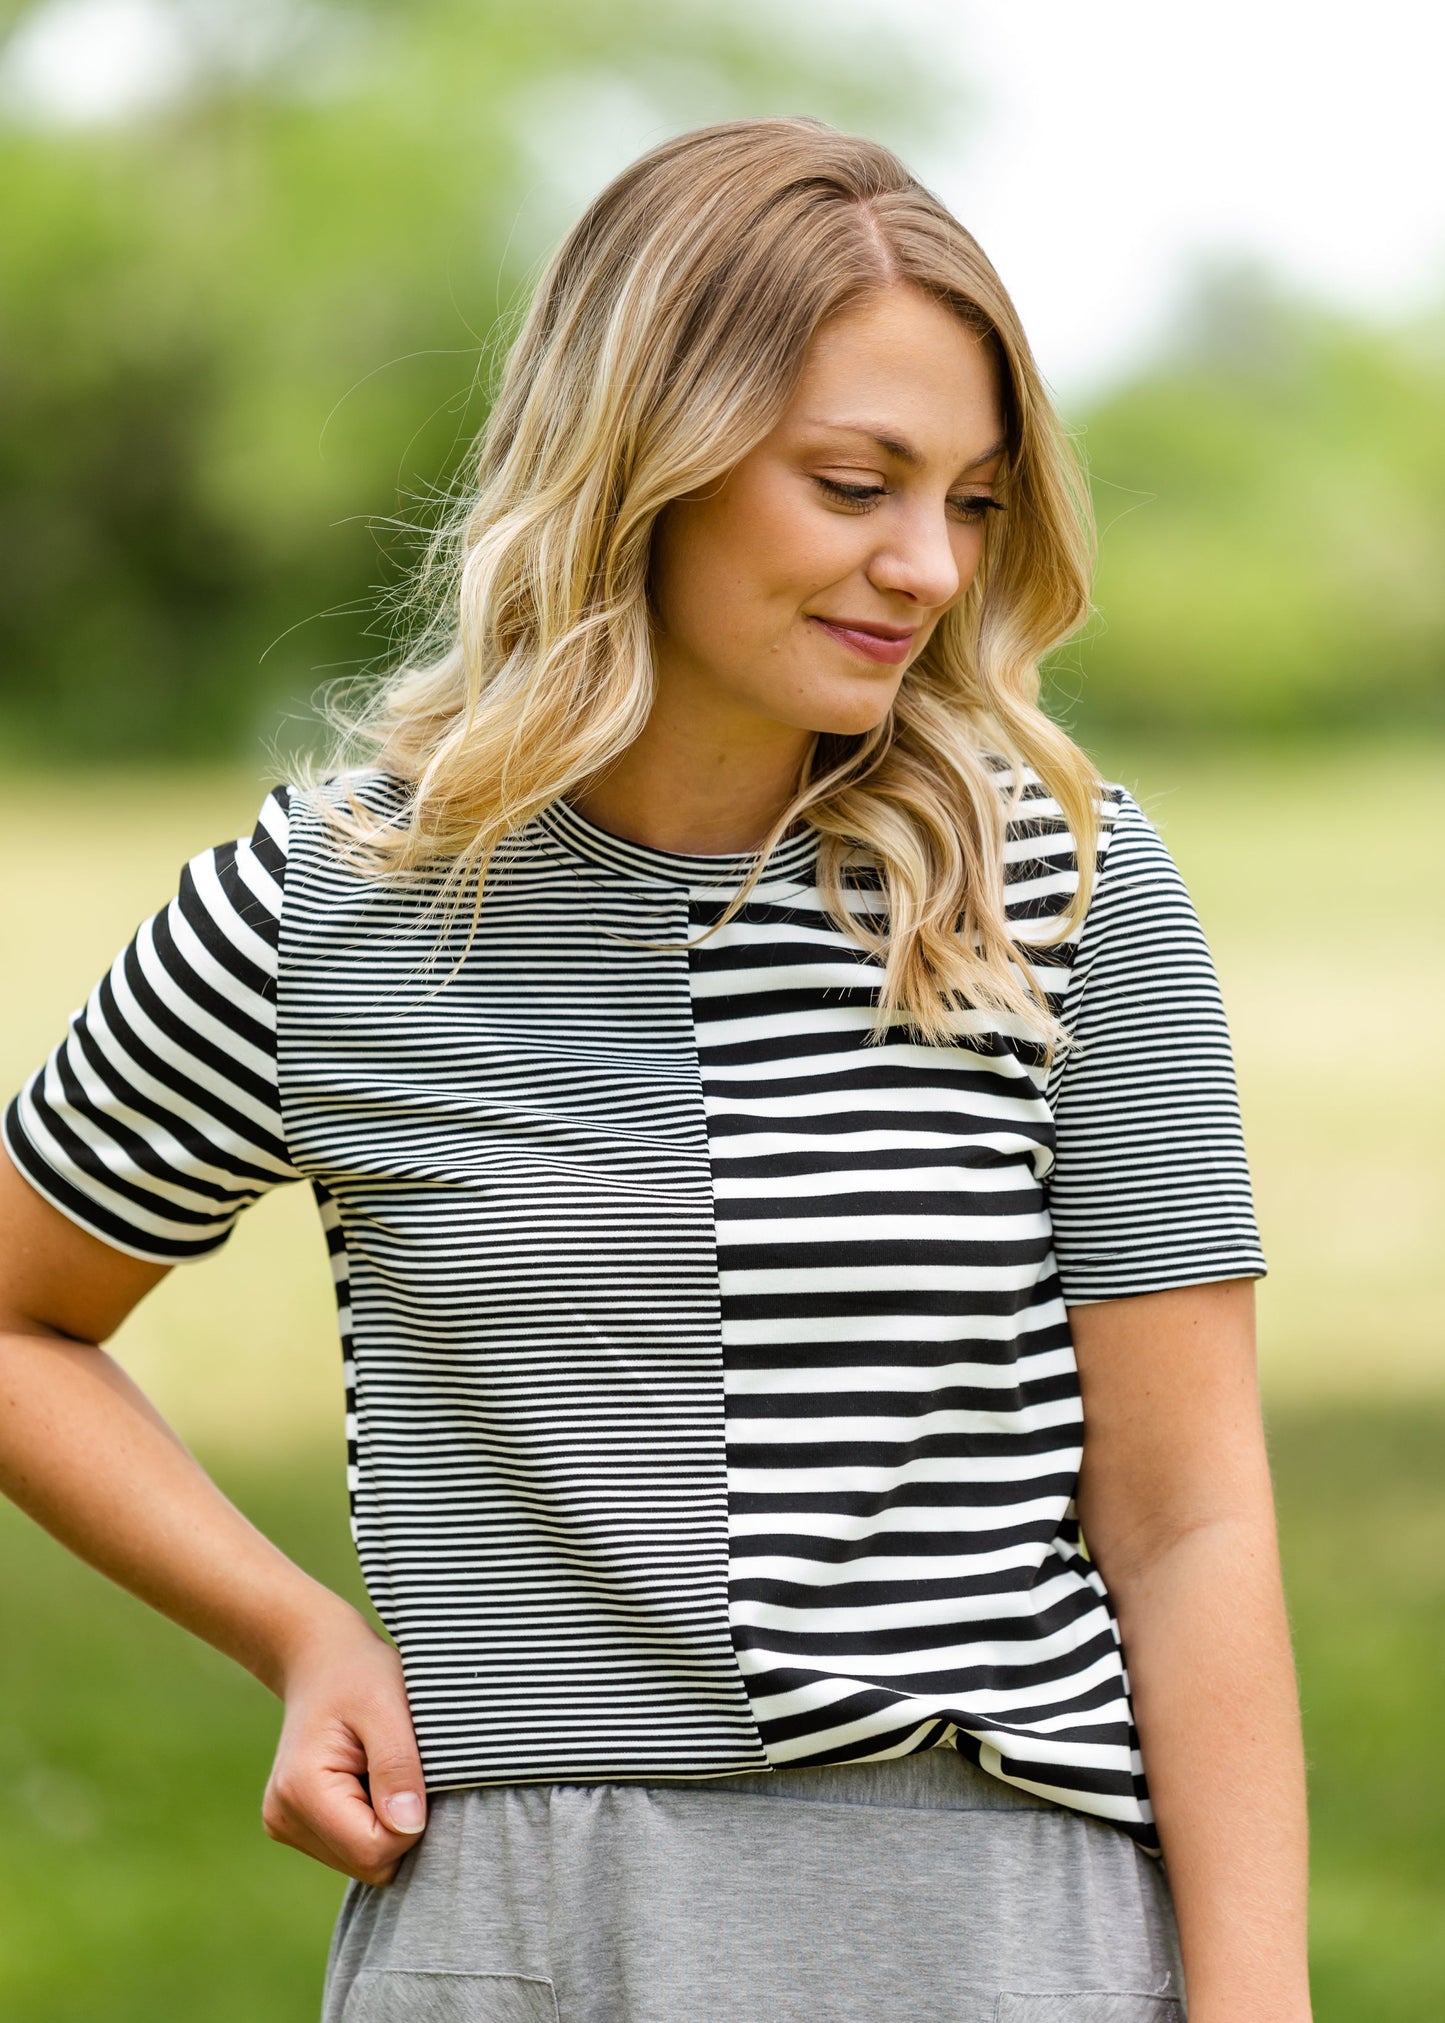 Black and White Mixed Striped Tee Shirt - FINAL SALE Tops